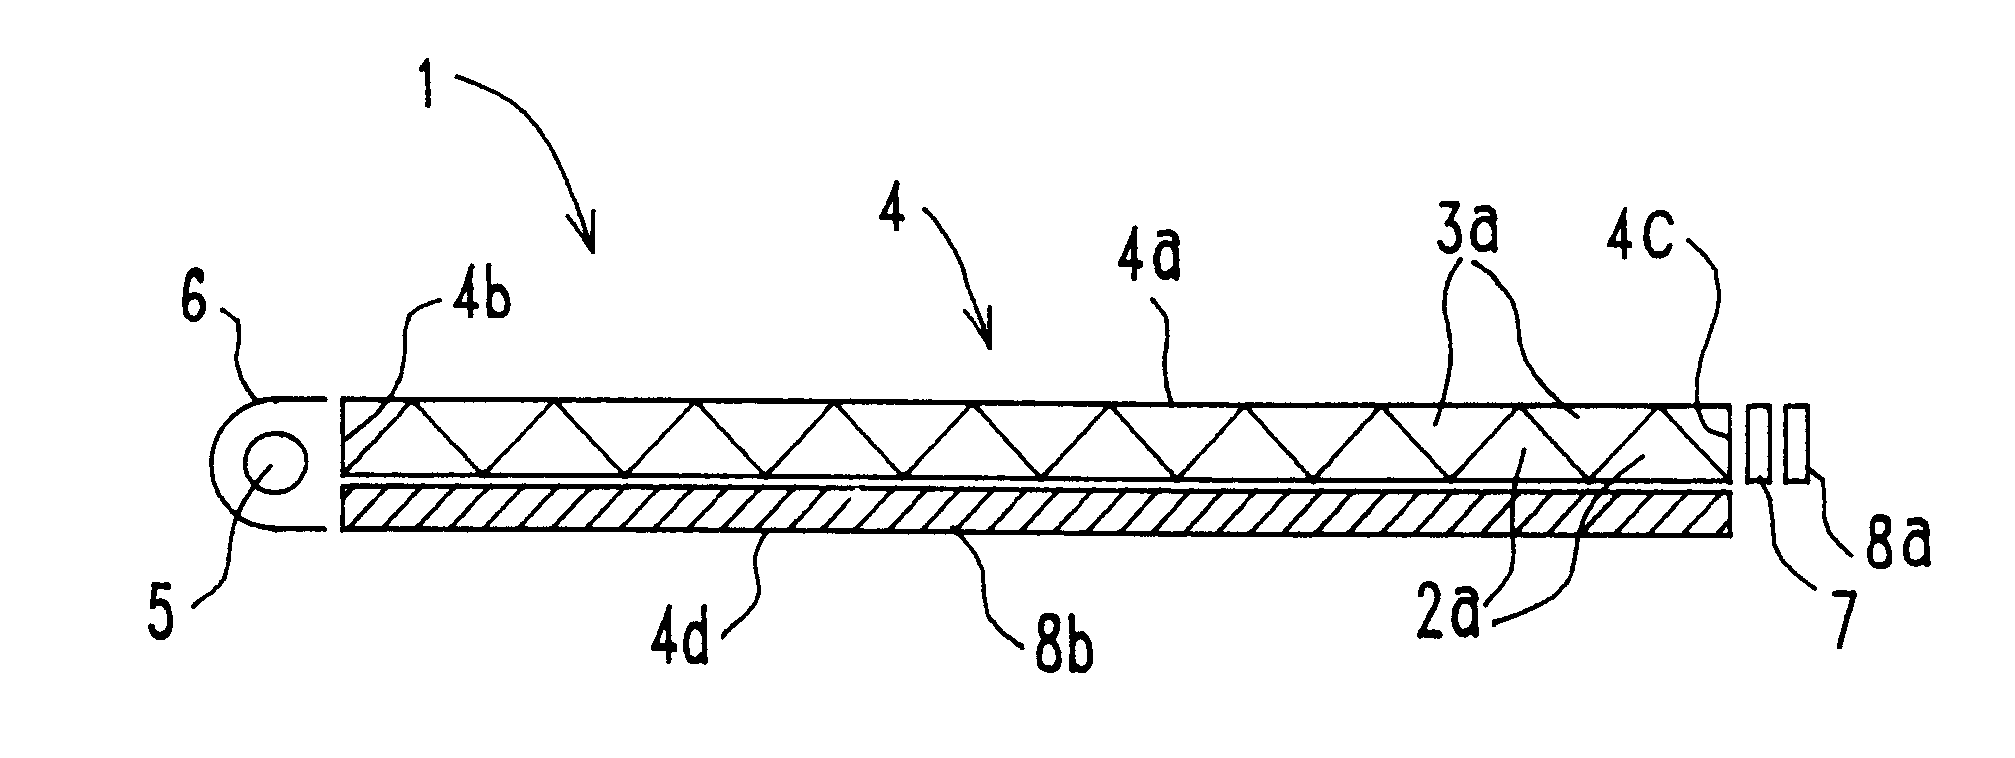 Planar light source device having polarization separator formed of two sheets with mating triangular prisms and different indices of refraction